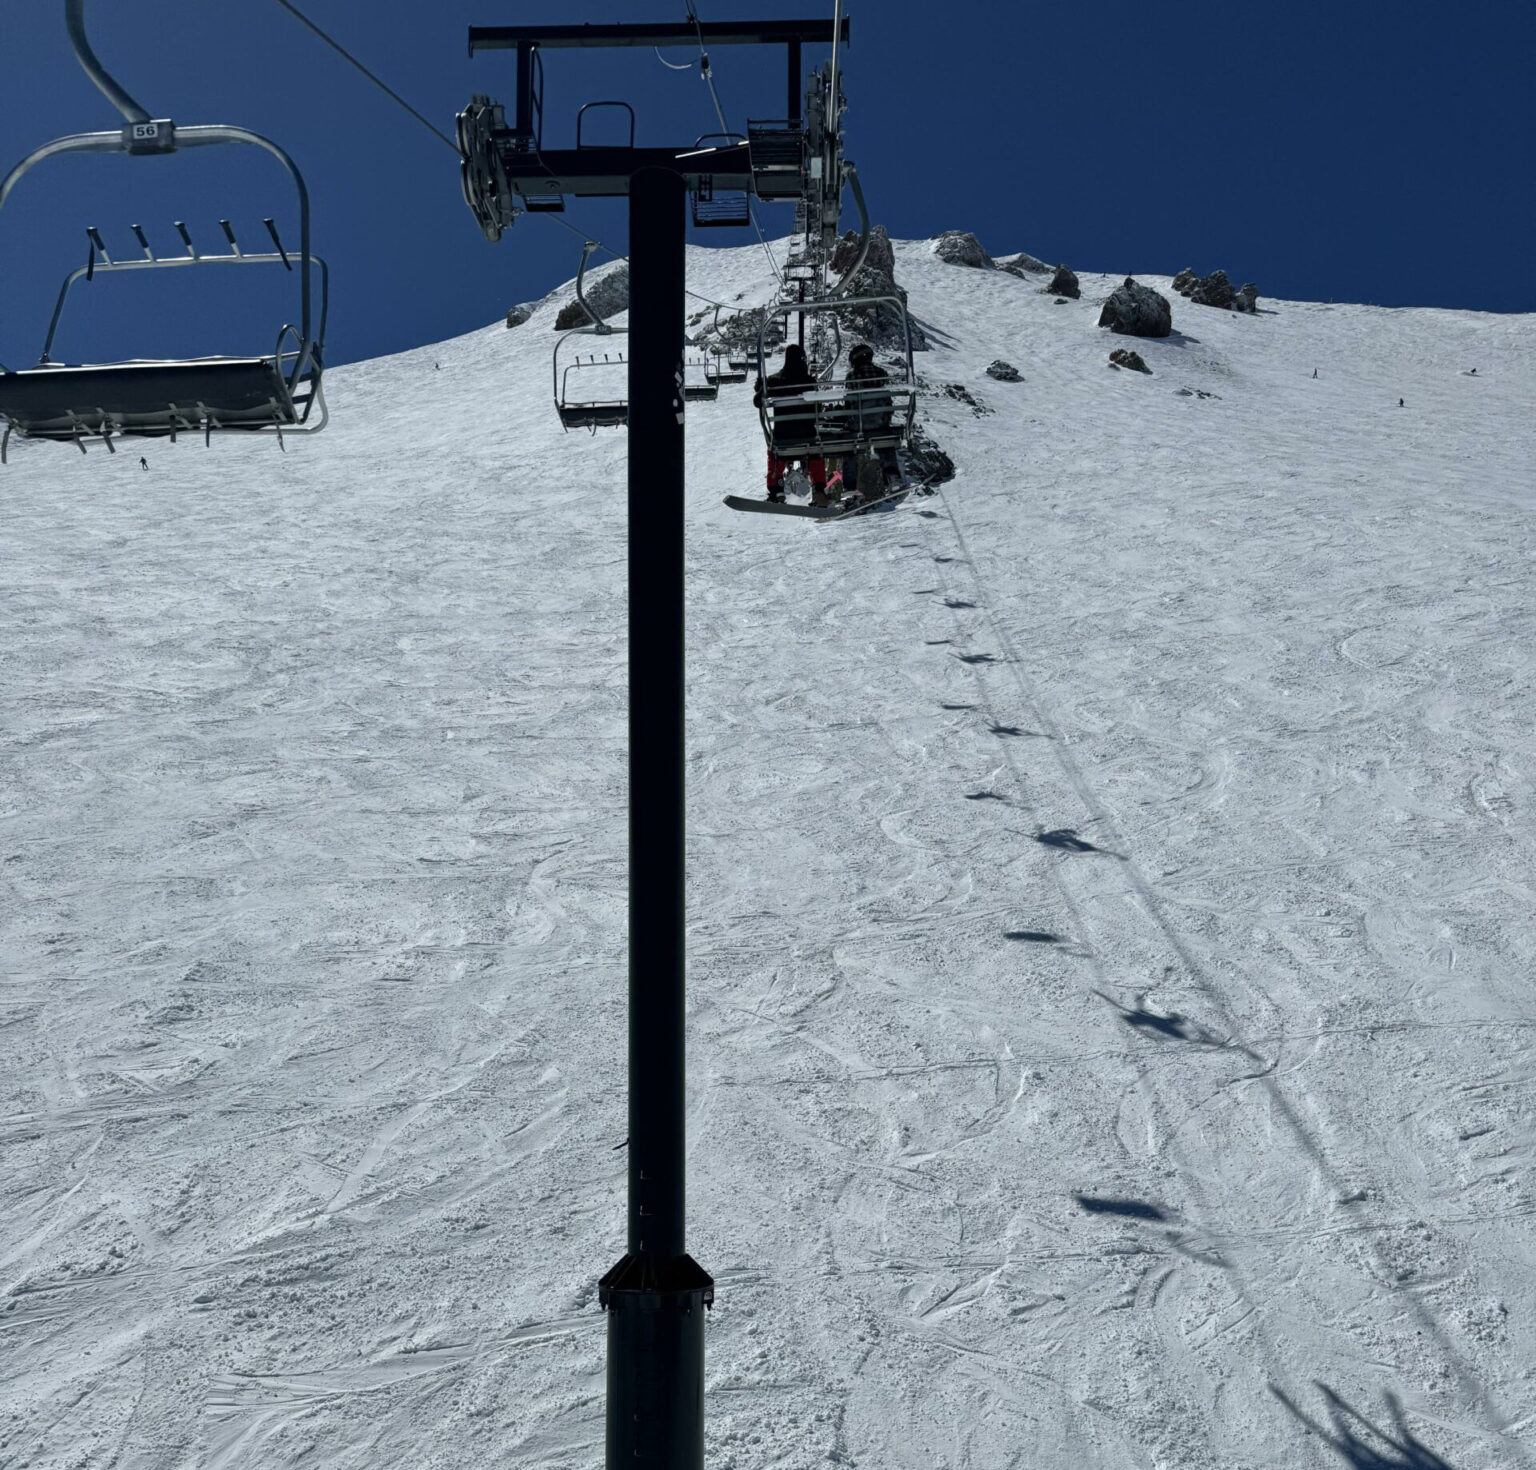 Riding Up Chair 23 on Tuesday Morning